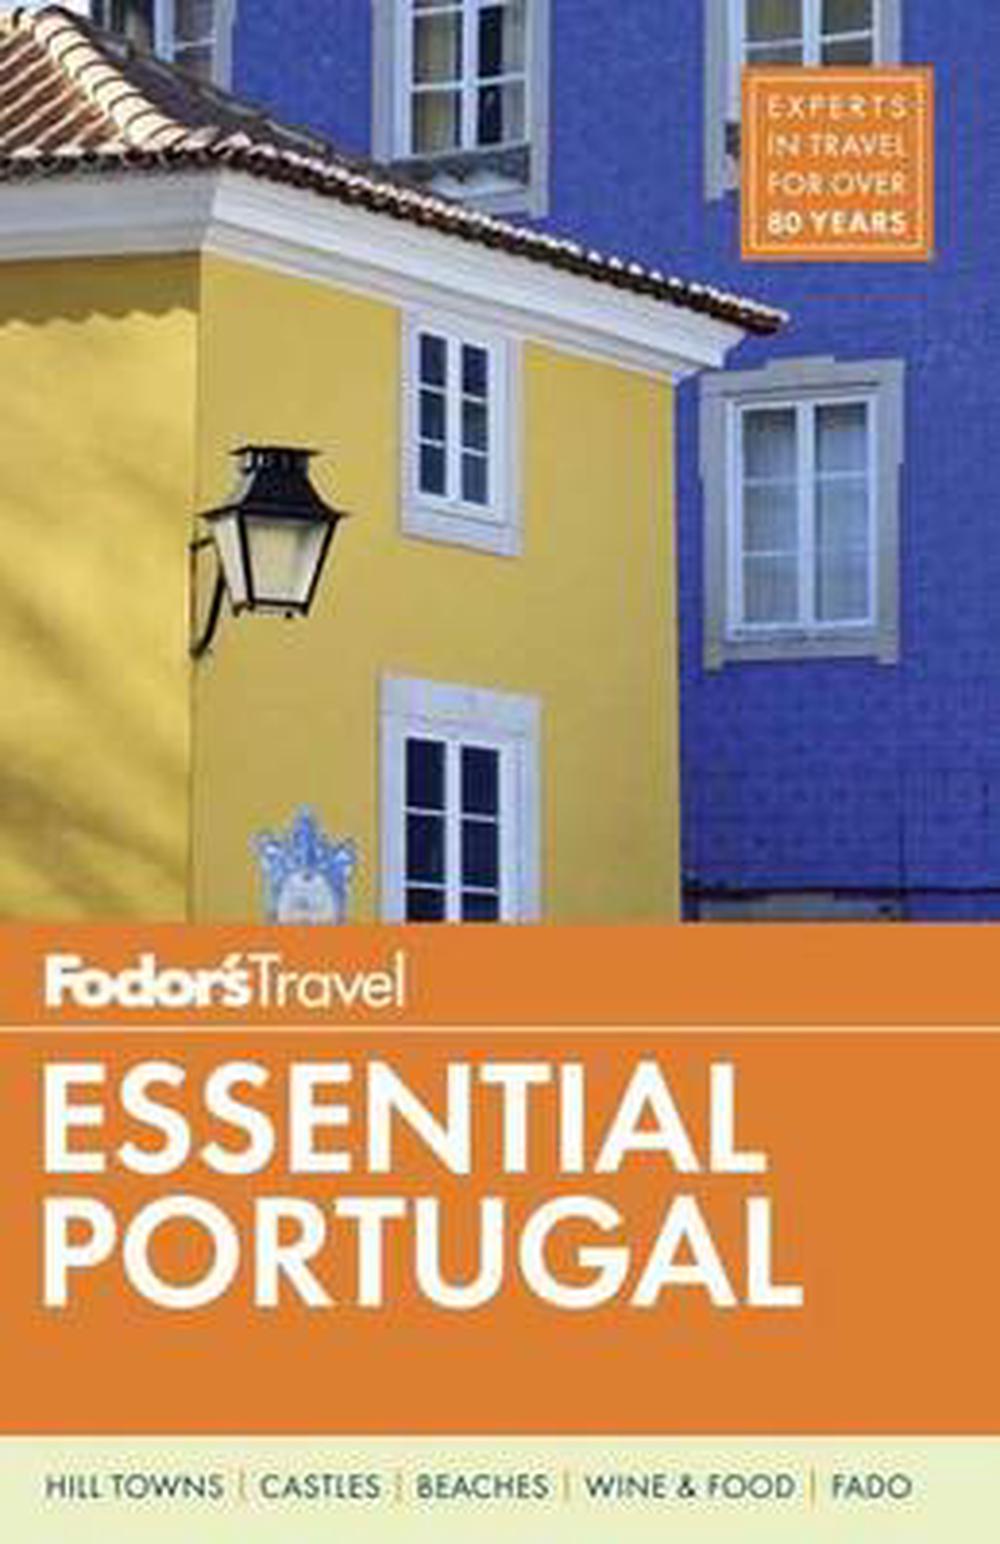 fodors travel guide portugal